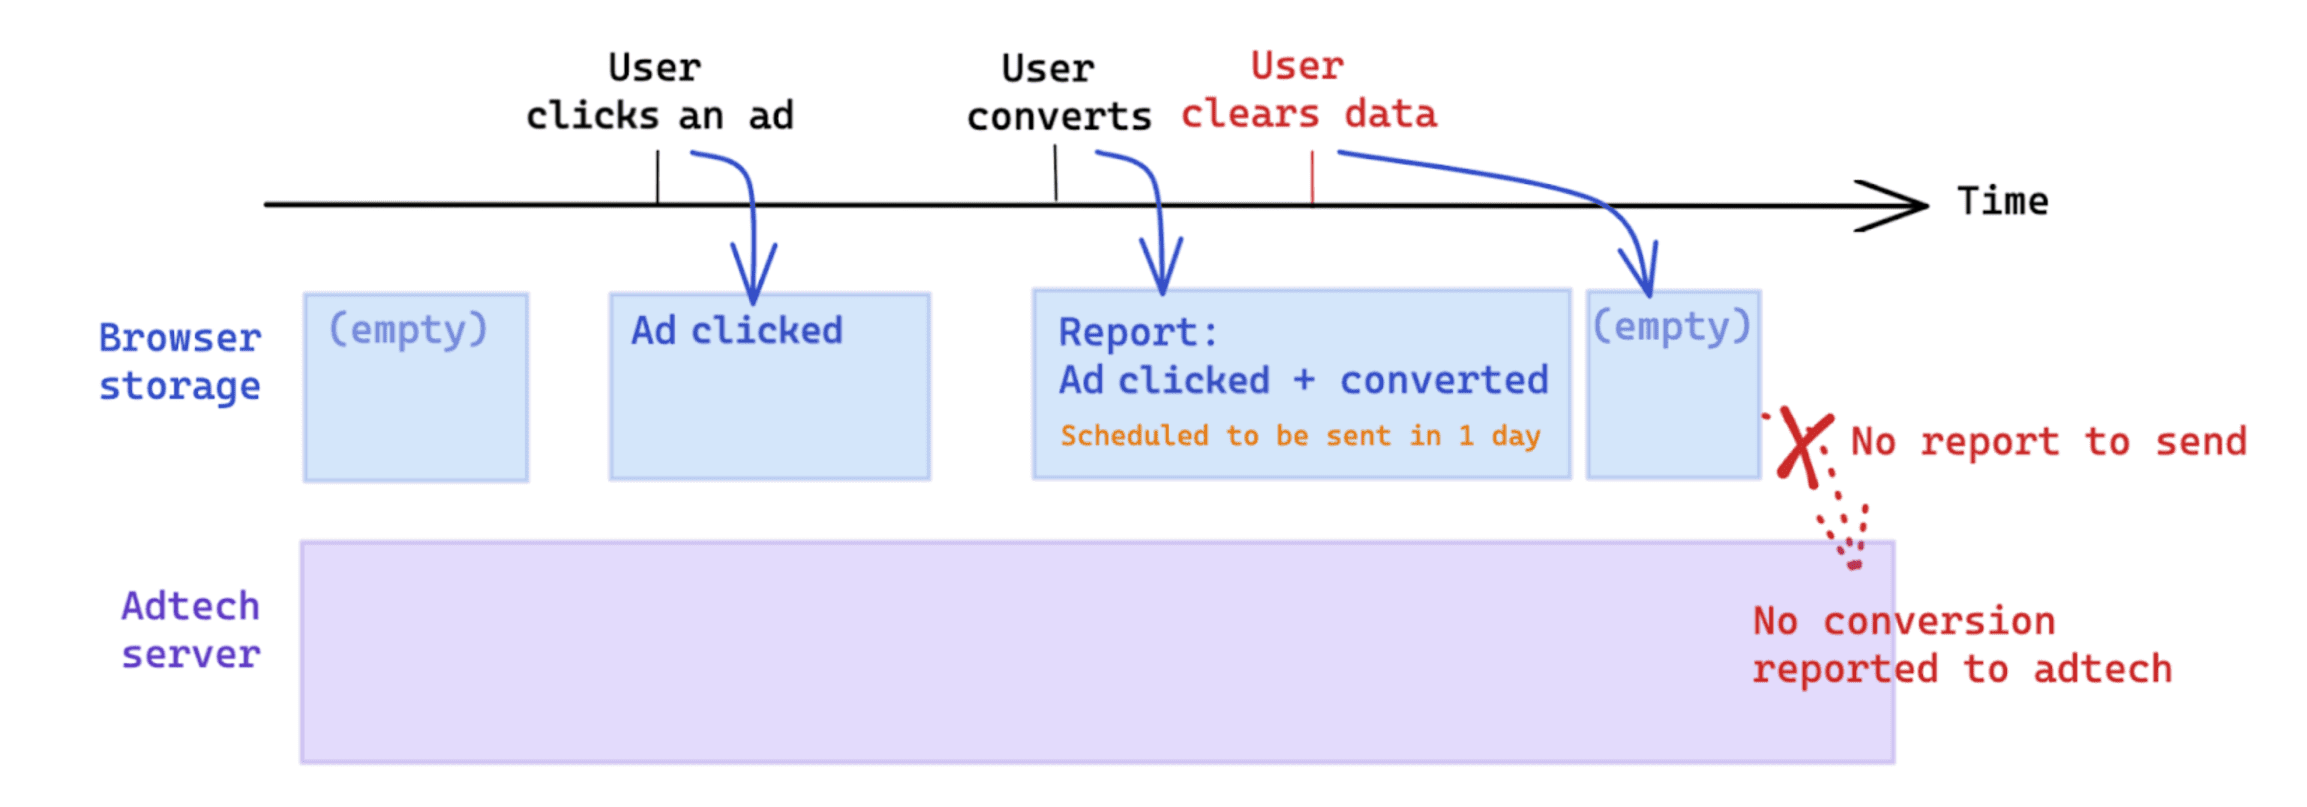 User-initiated data clearing after a conversion impacts measurement based on the Attribution Reporting API.